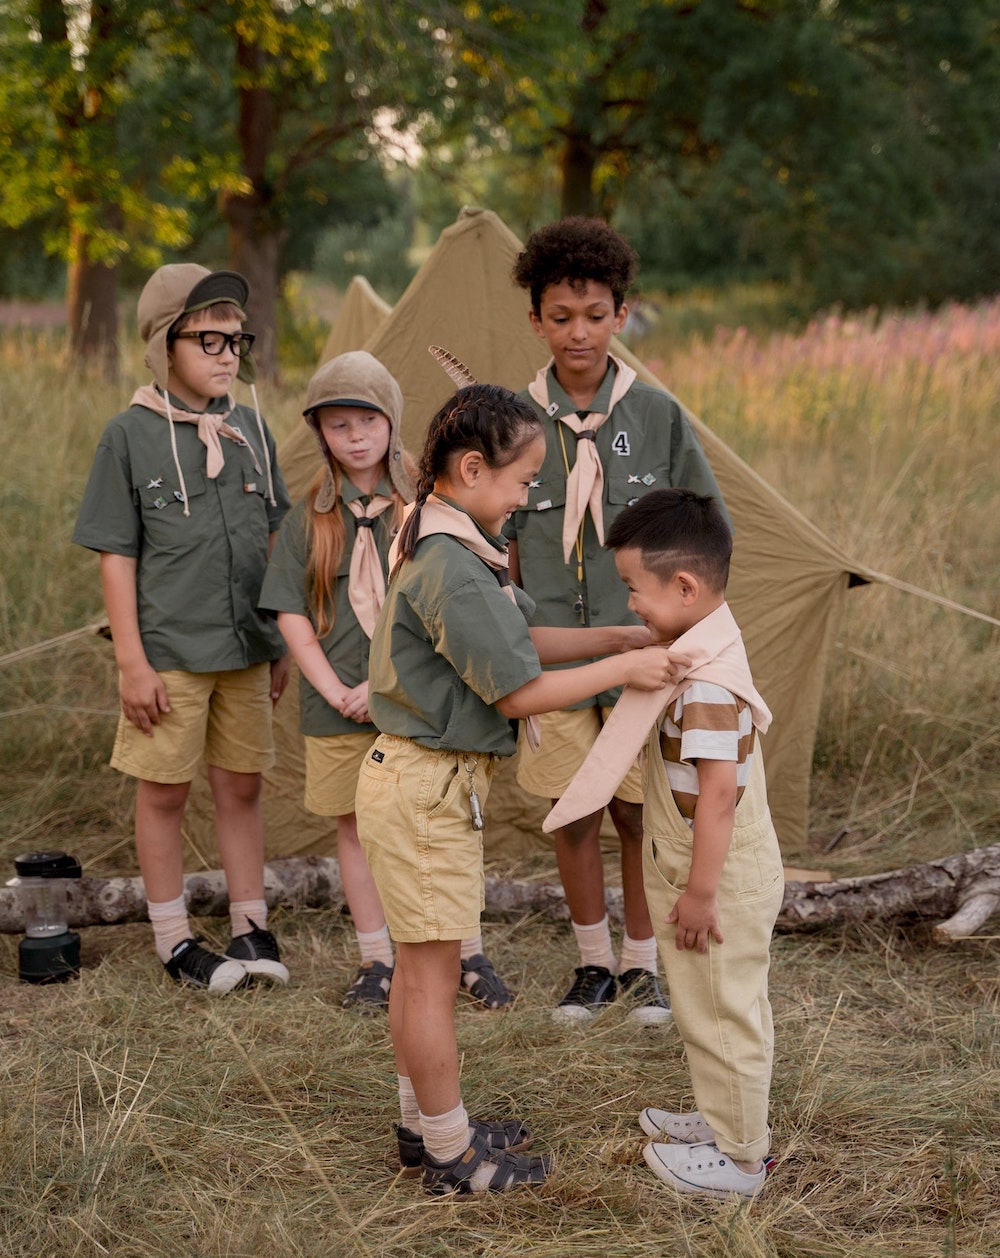 Children dressed in scout uniforms. A girl is helping a little boy tie his neckerchief